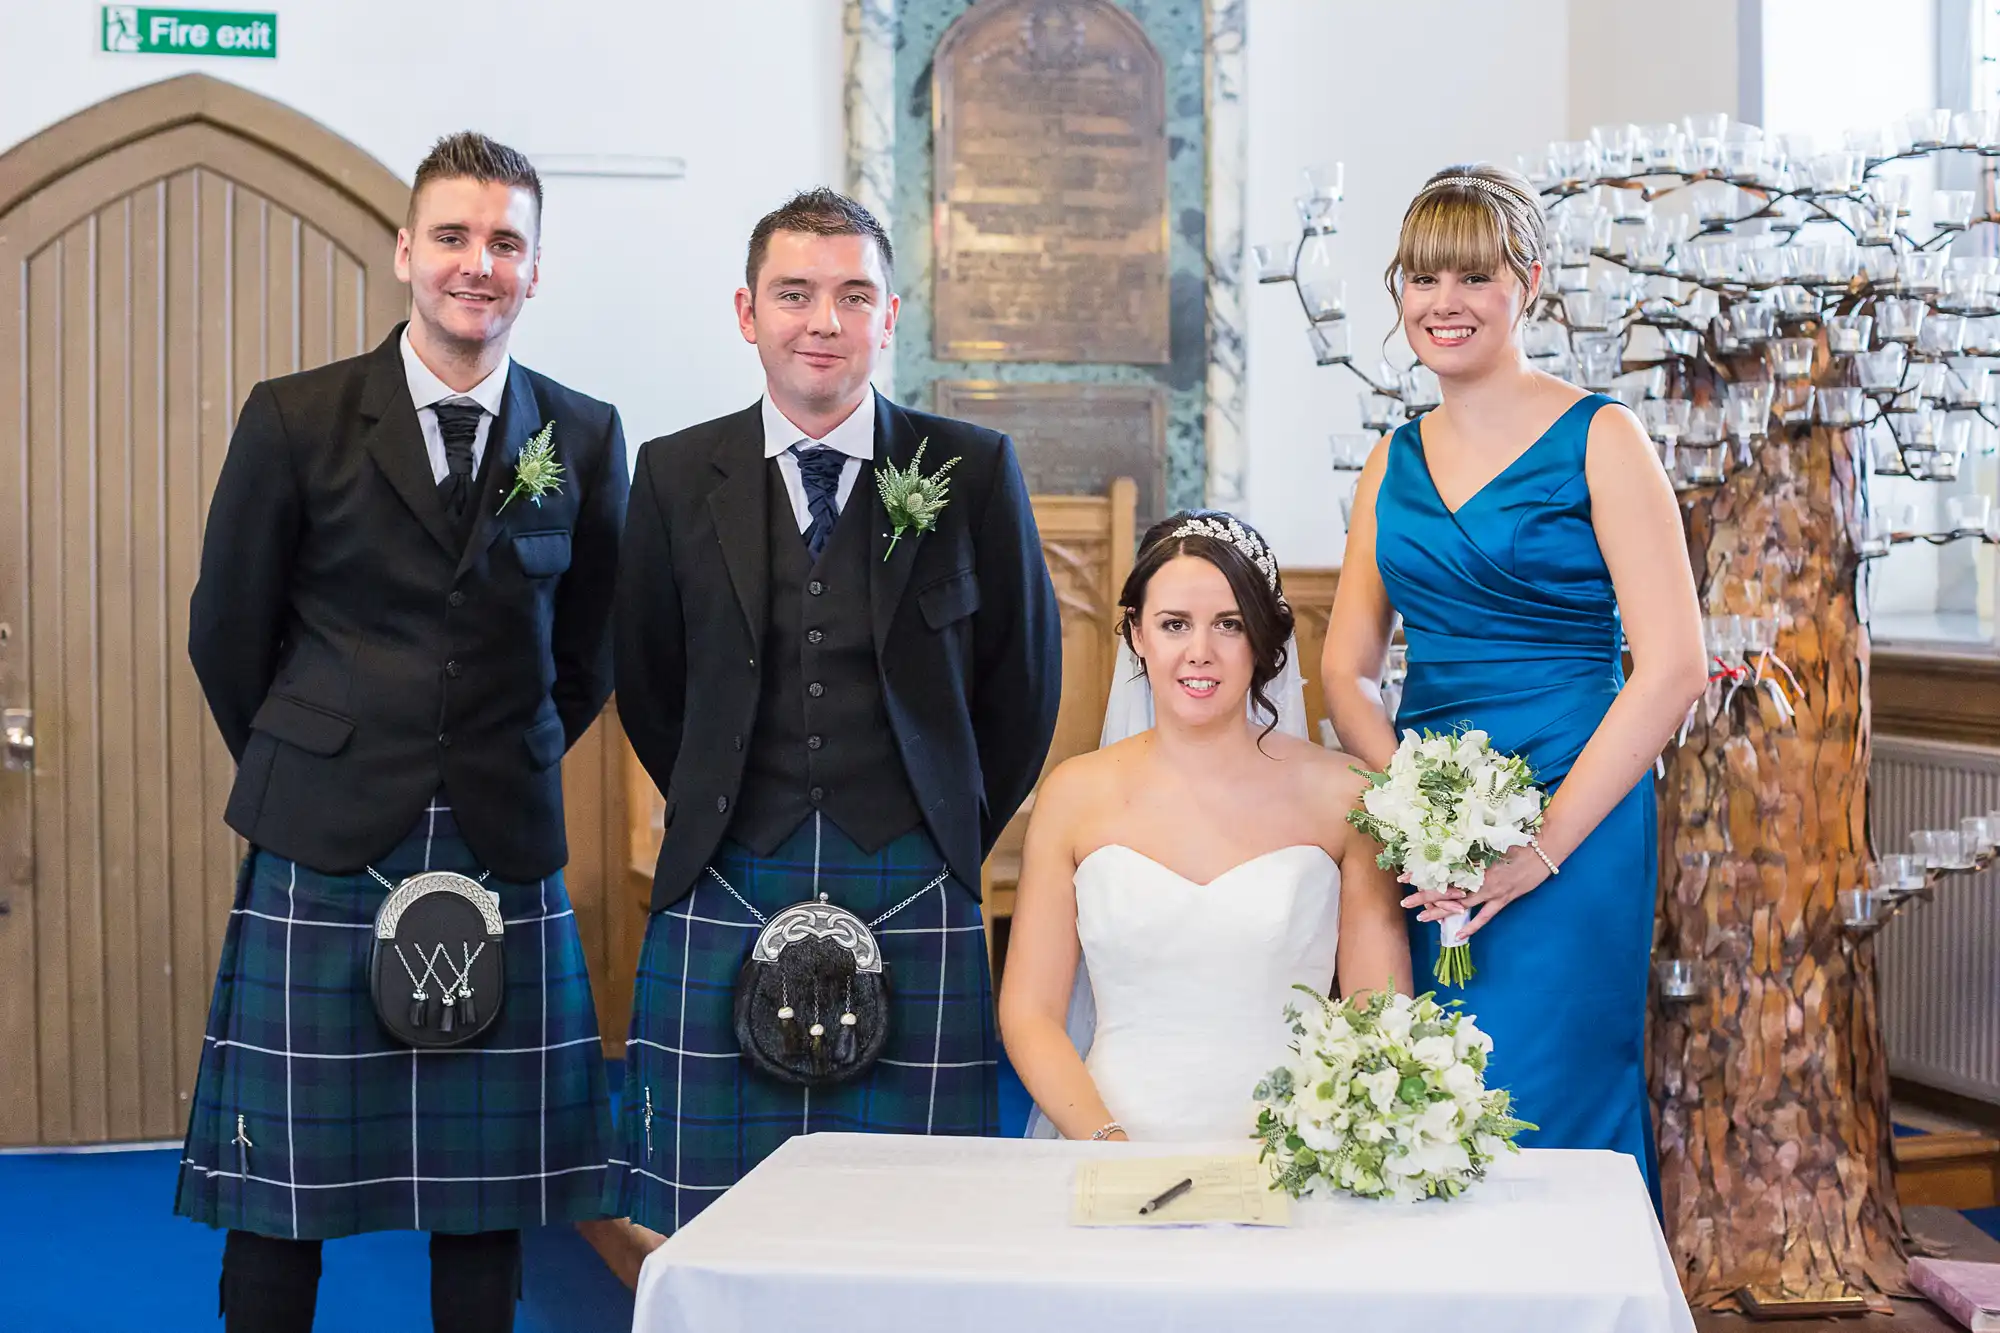 Four people dressed for a wedding posing in a church, including two men in kilts and a bride and bridesmaid holding bouquets.